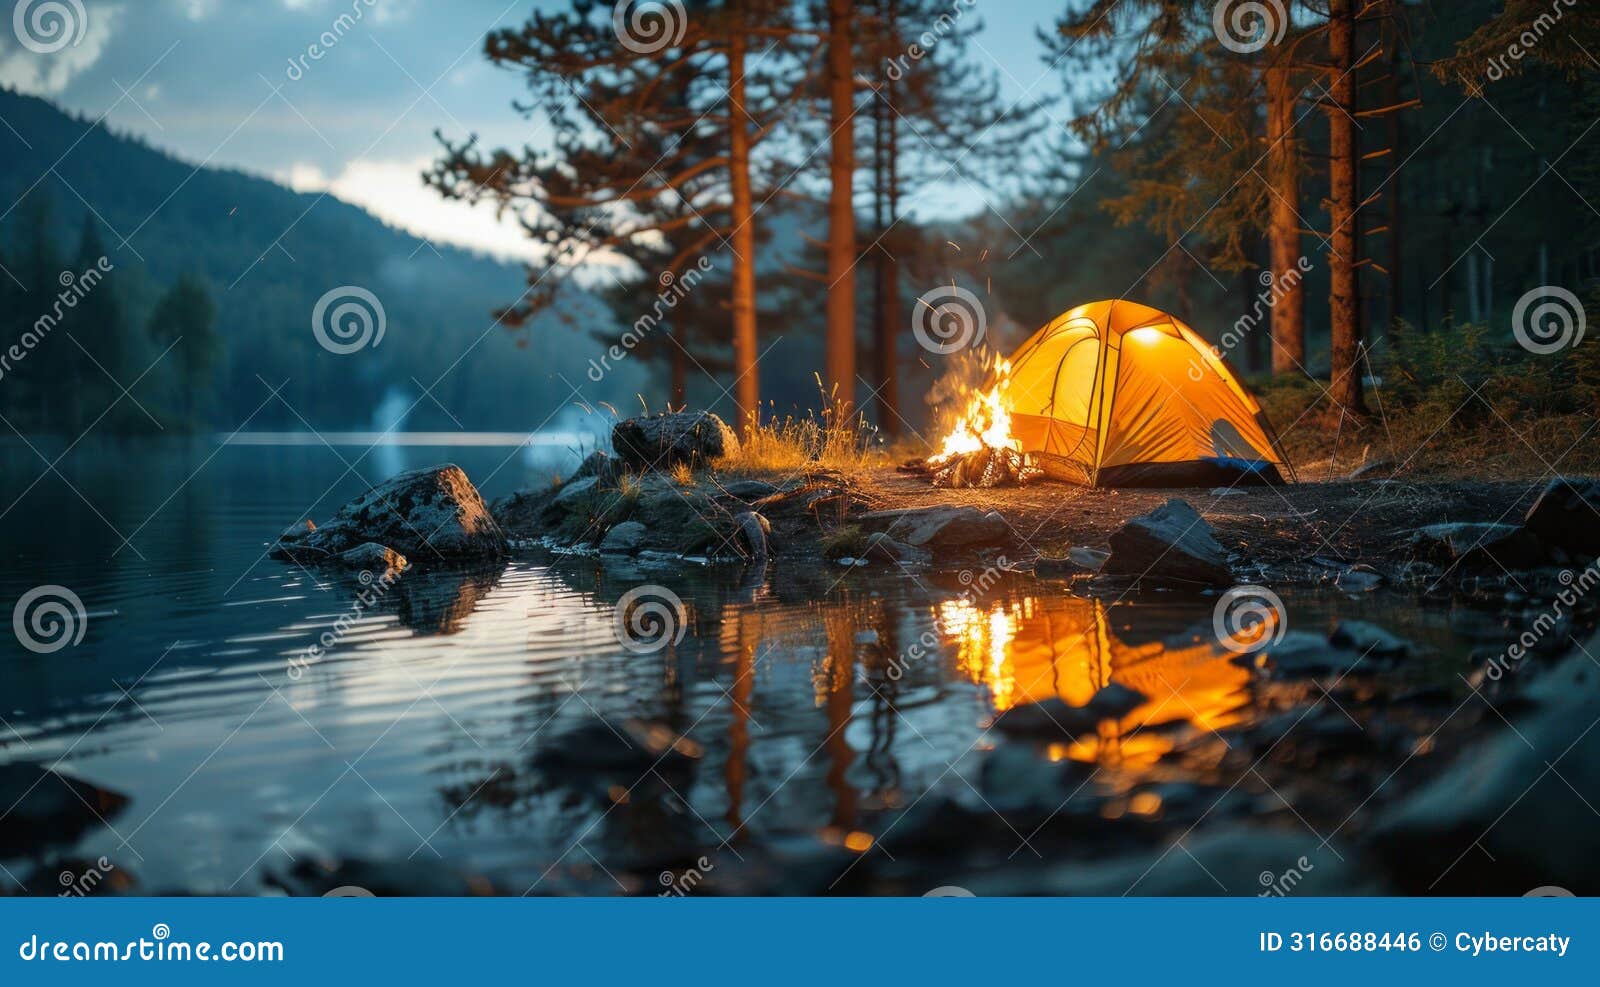 at a riverside campsite, a tent is pitched under the night sky, illuminated by the warm glow of a crackling fire